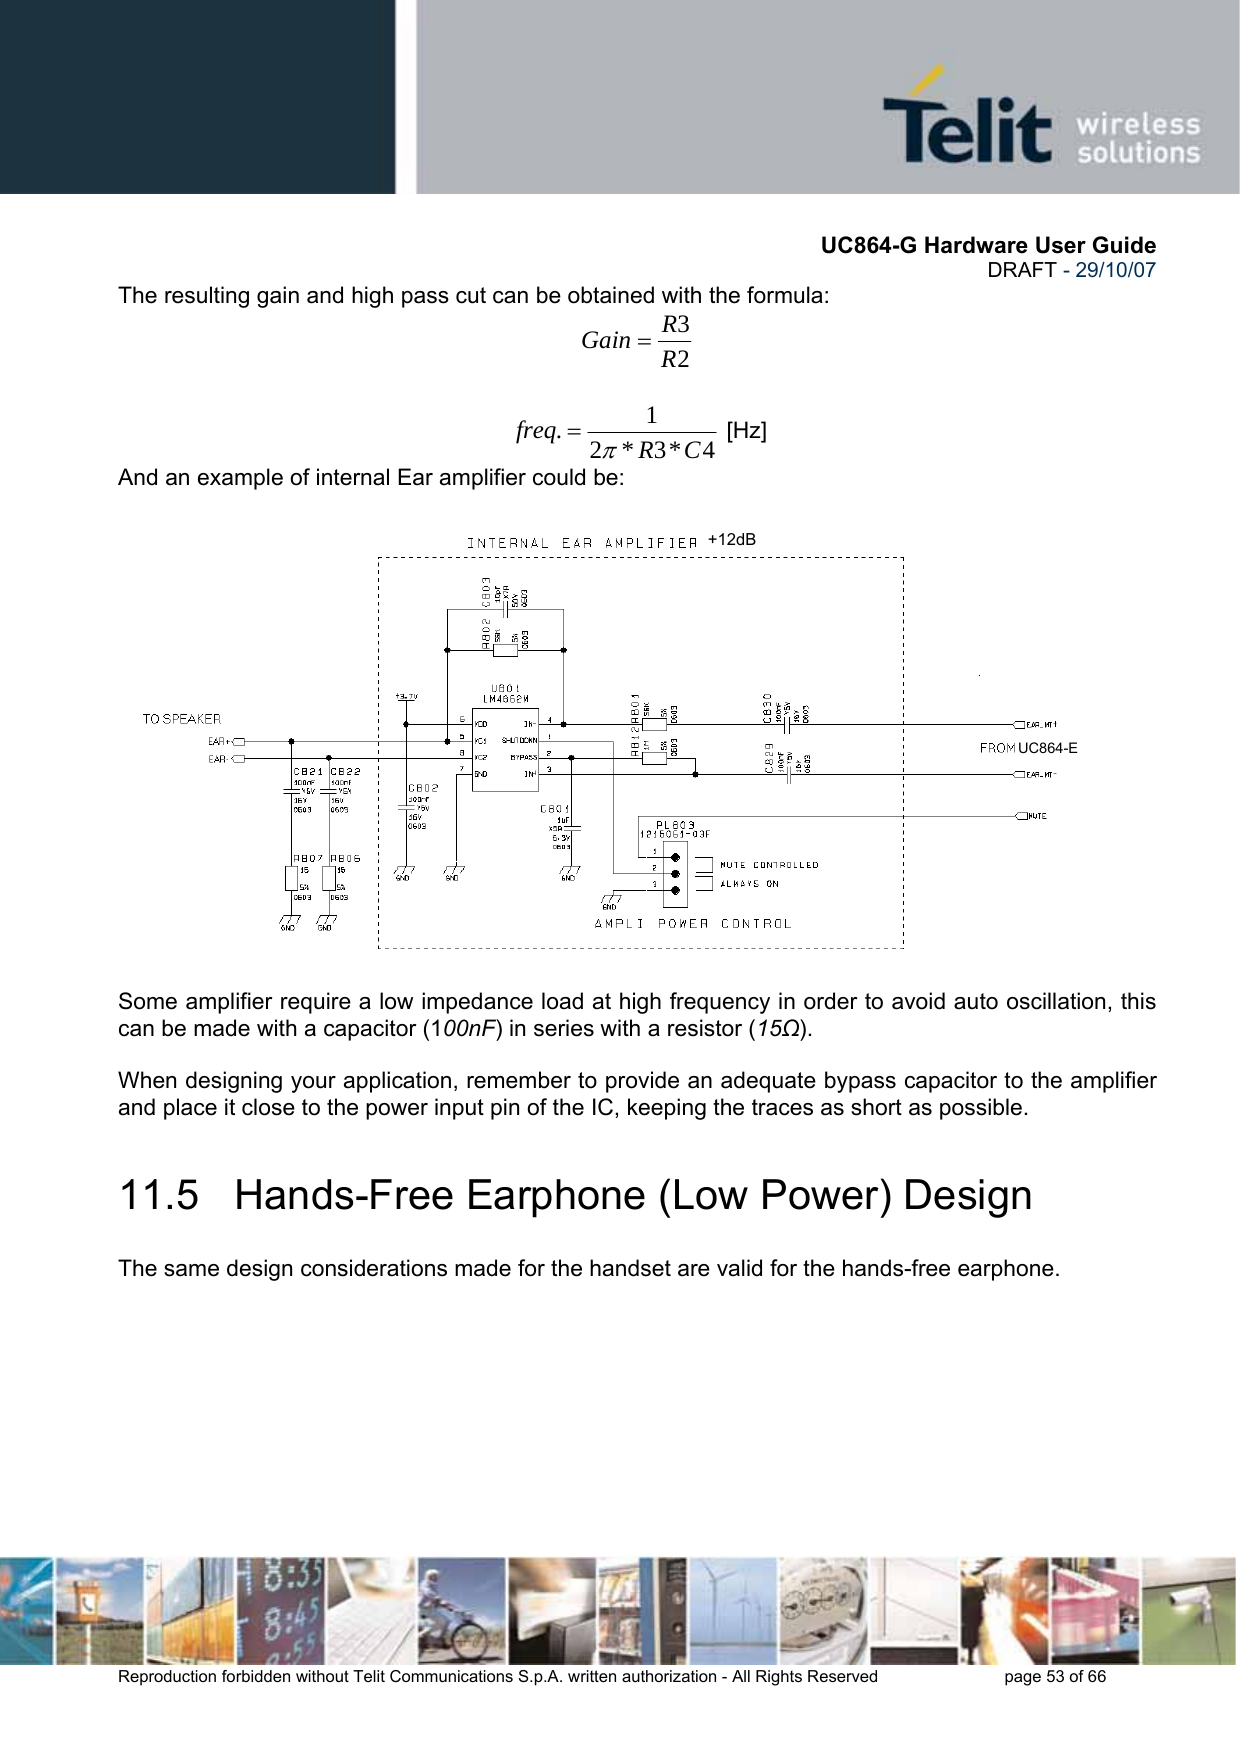       UC864-G Hardware User Guide  DRAFT - 29/10/07      Reproduction forbidden without Telit Communications S.p.A. written authorization - All Rights Reserved    page 53 of 66  The resulting gain and high pass cut can be obtained with the formula: 23RRGain =  4*3*21.CRfreqπ= [Hz] And an example of internal Ear amplifier could be:  Some amplifier require a low impedance load at high frequency in order to avoid auto oscillation, this can be made with a capacitor (100nF) in series with a resistor (15Ω).  When designing your application, remember to provide an adequate bypass capacitor to the amplifier and place it close to the power input pin of the IC, keeping the traces as short as possible. 11.5   Hands-Free Earphone (Low Power) Design The same design considerations made for the handset are valid for the hands-free earphone. +12dBUC864-E